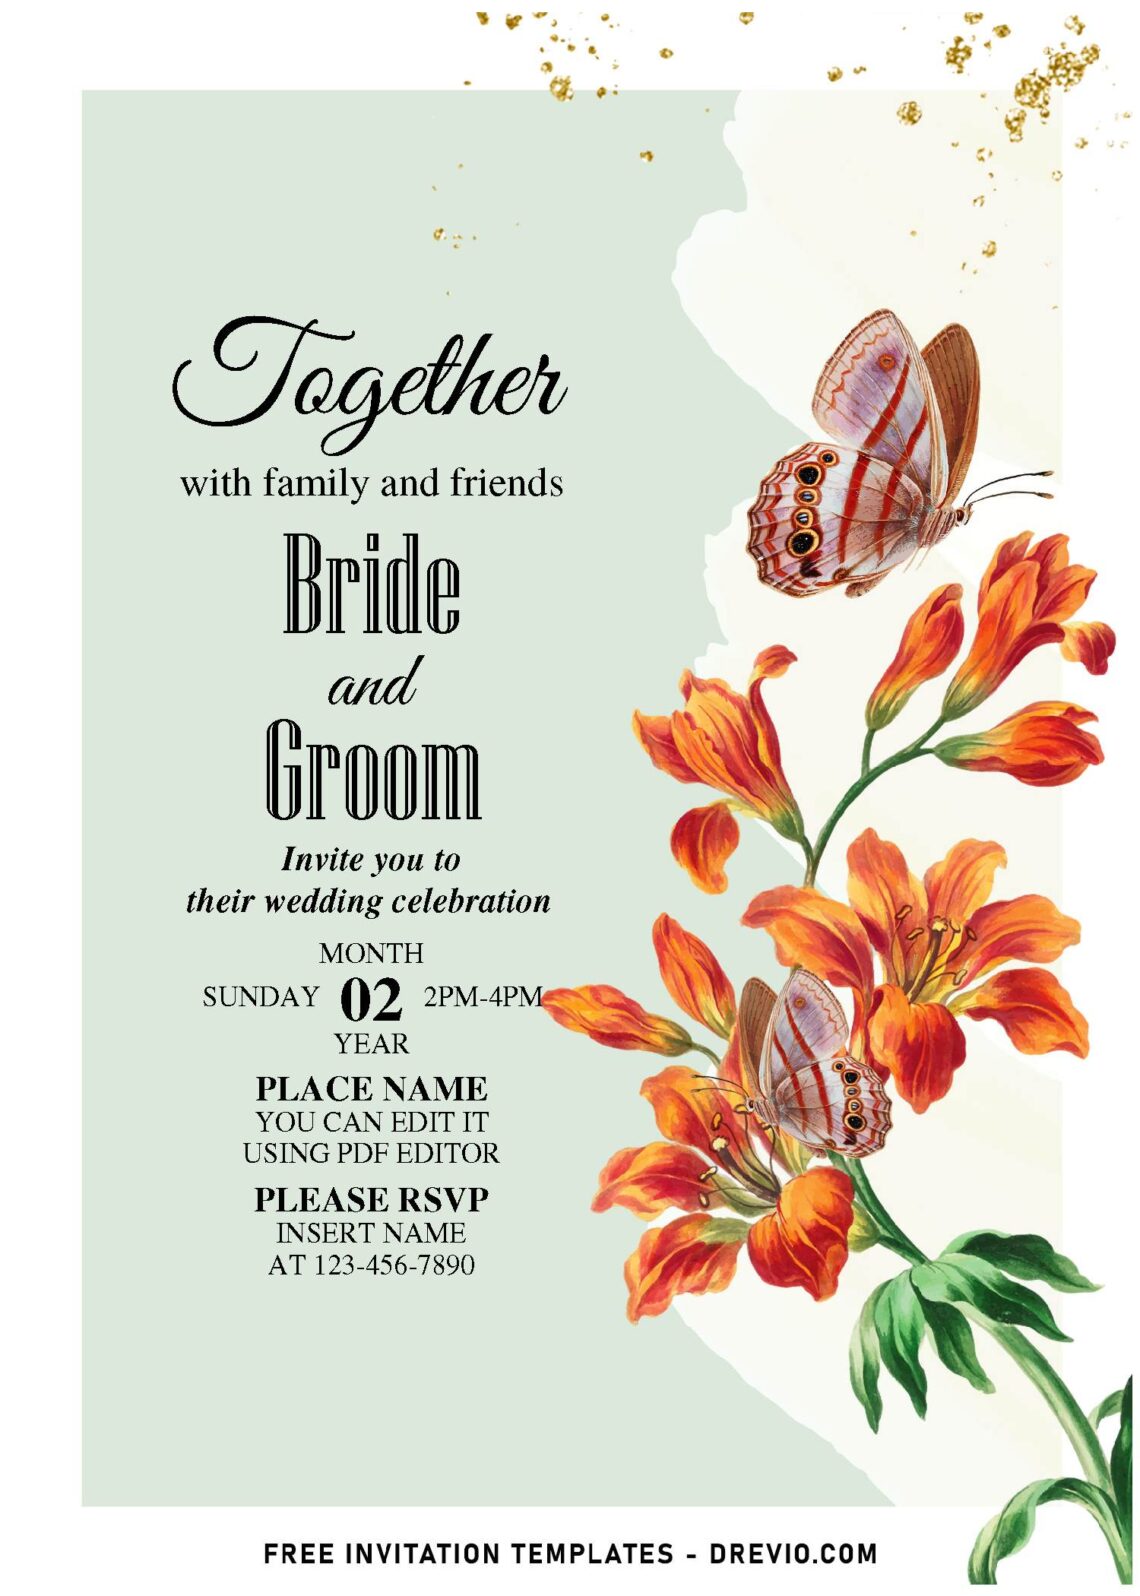 (Free Editable PDF) Heavenly Stunning Colorful Flowers Wedding Invitation Templates with watercolor tulips